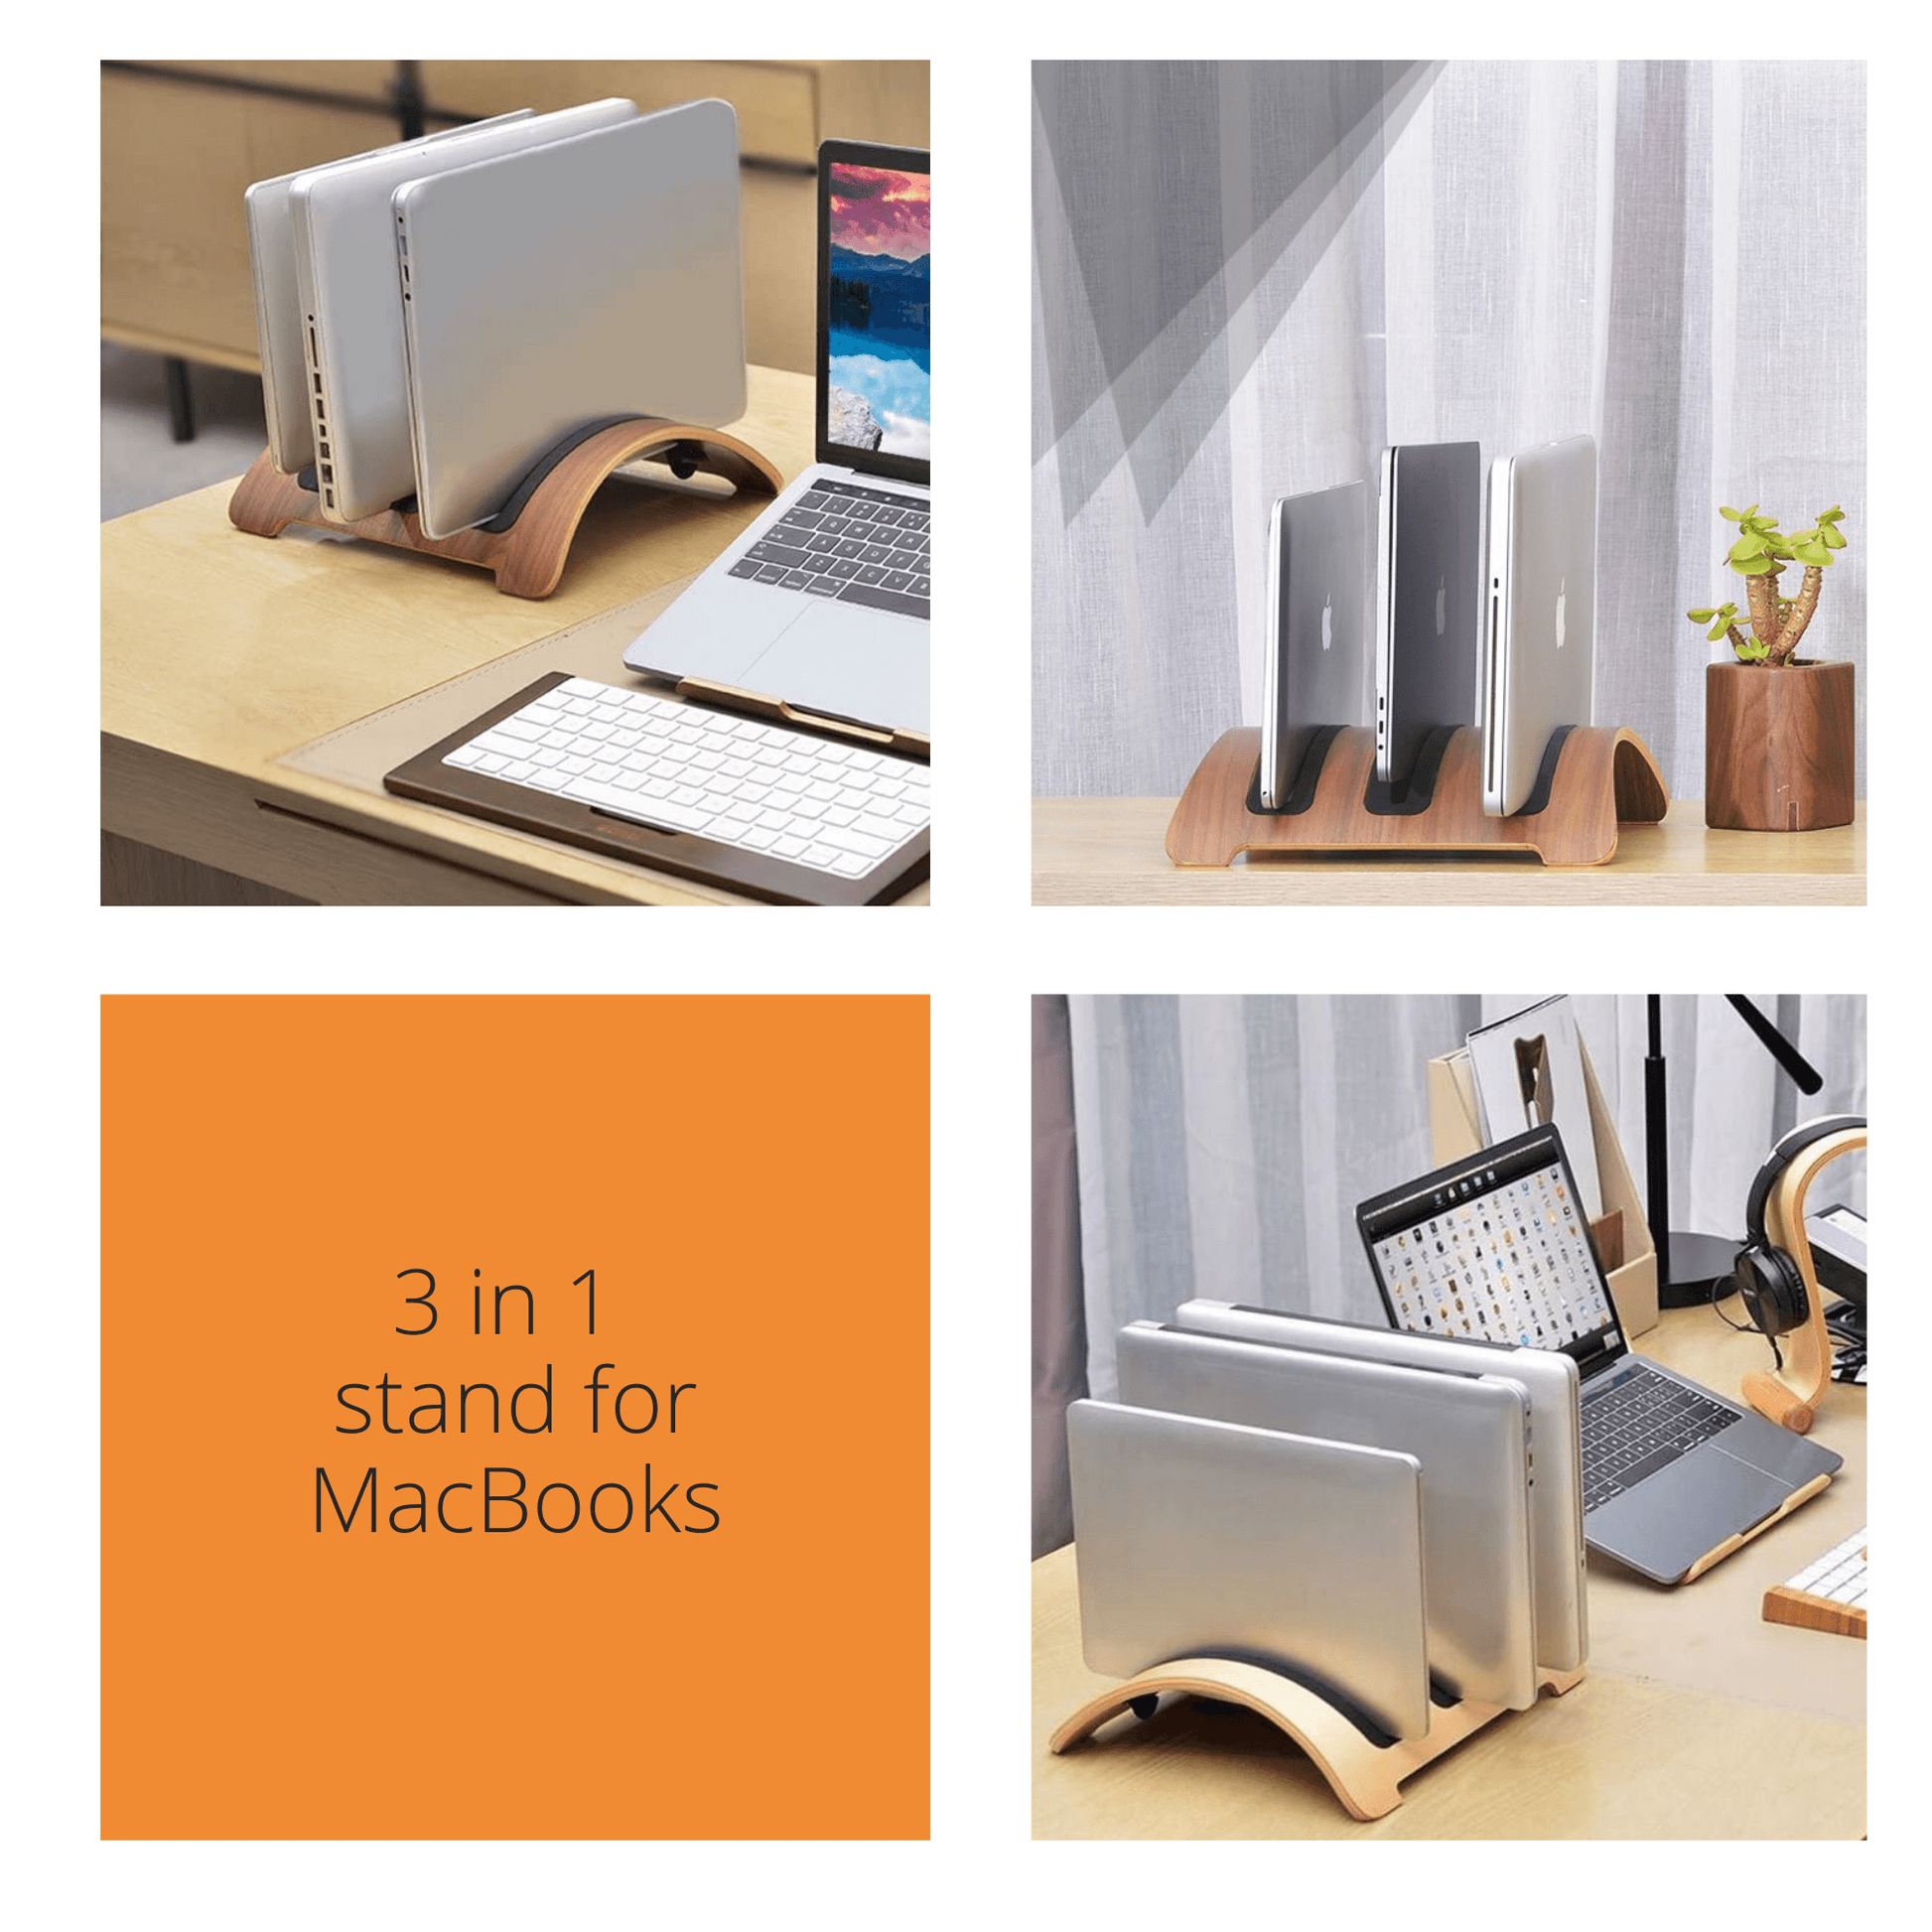 Vertical MacBook Stand 3 in 1 charging station 🌳 Natural Wood. ♻️ Eco-friendly. ✈️ Free Worldwide Shipping. 🎁 Perfect Gift.